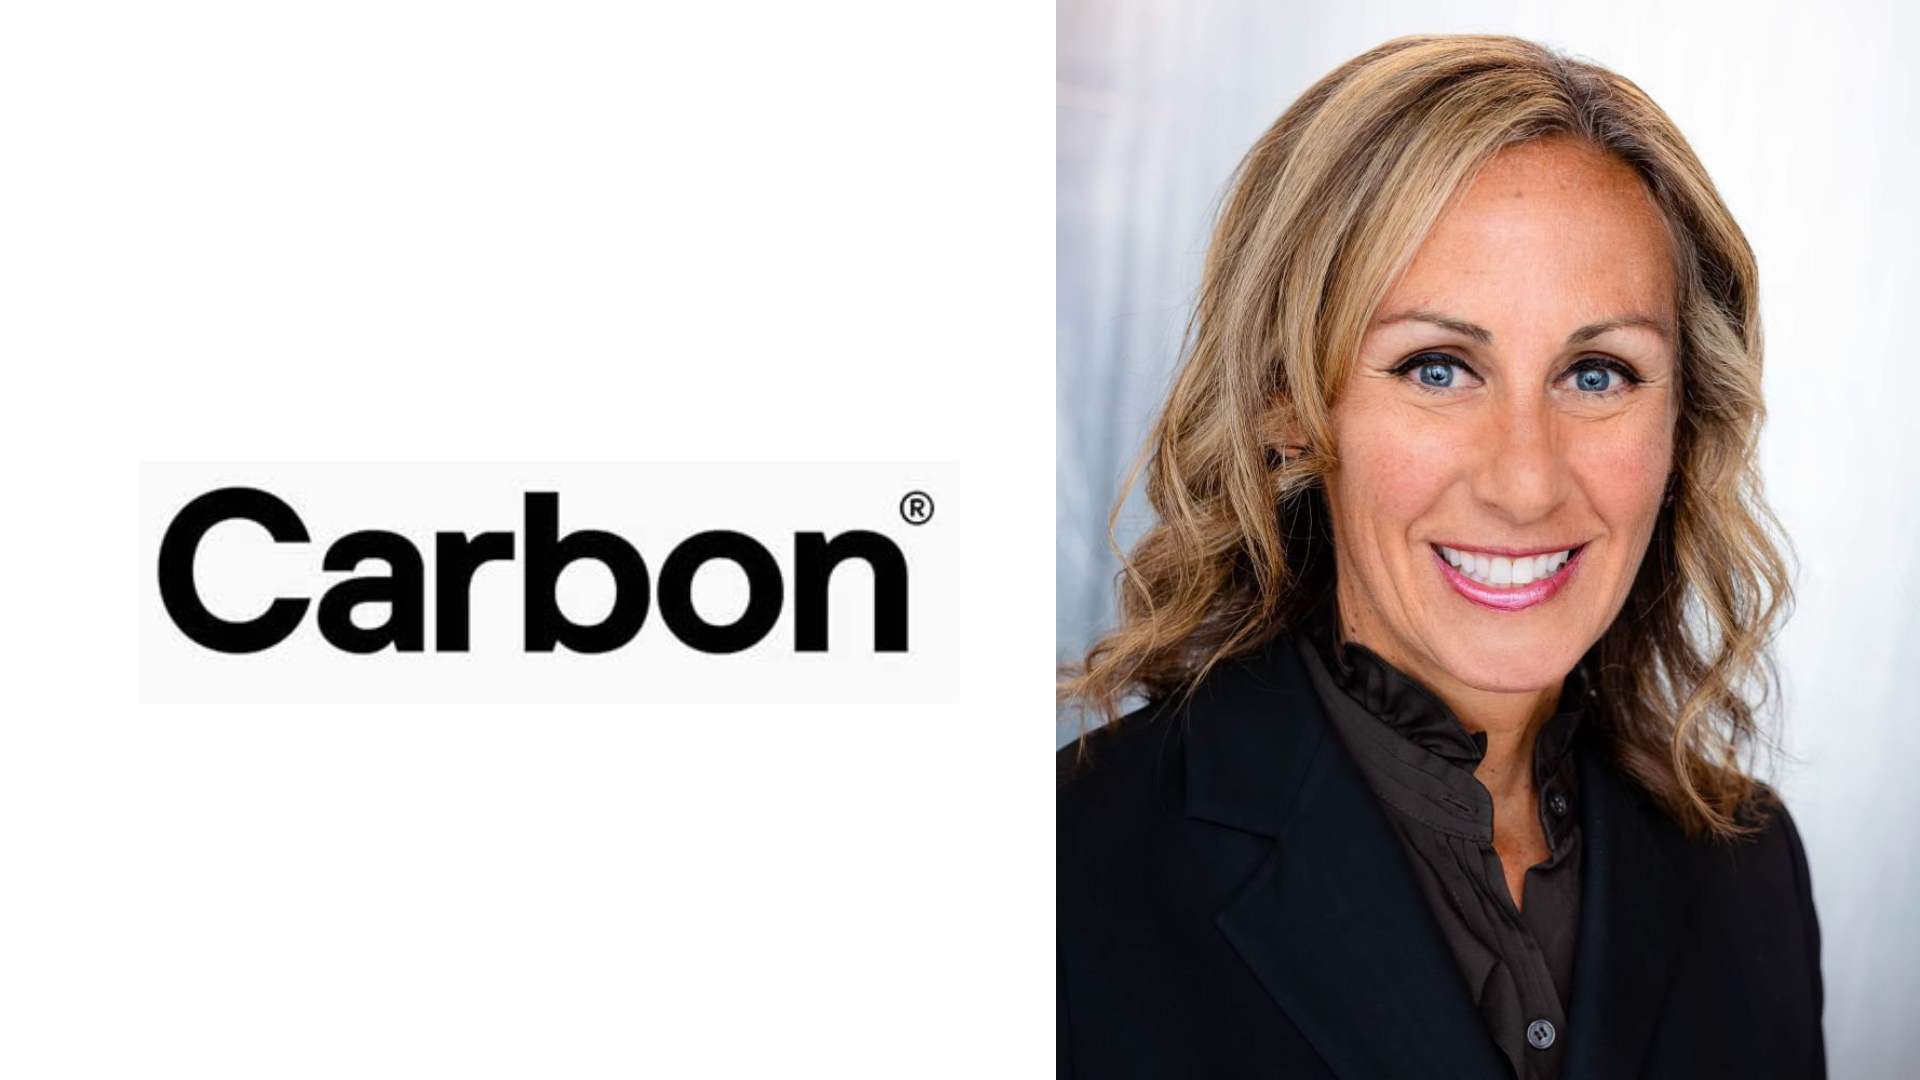 Carbon appointed Terri Capriolo as the Senior Vice President of Oral Health bringing extensive healthcare industry expertise.